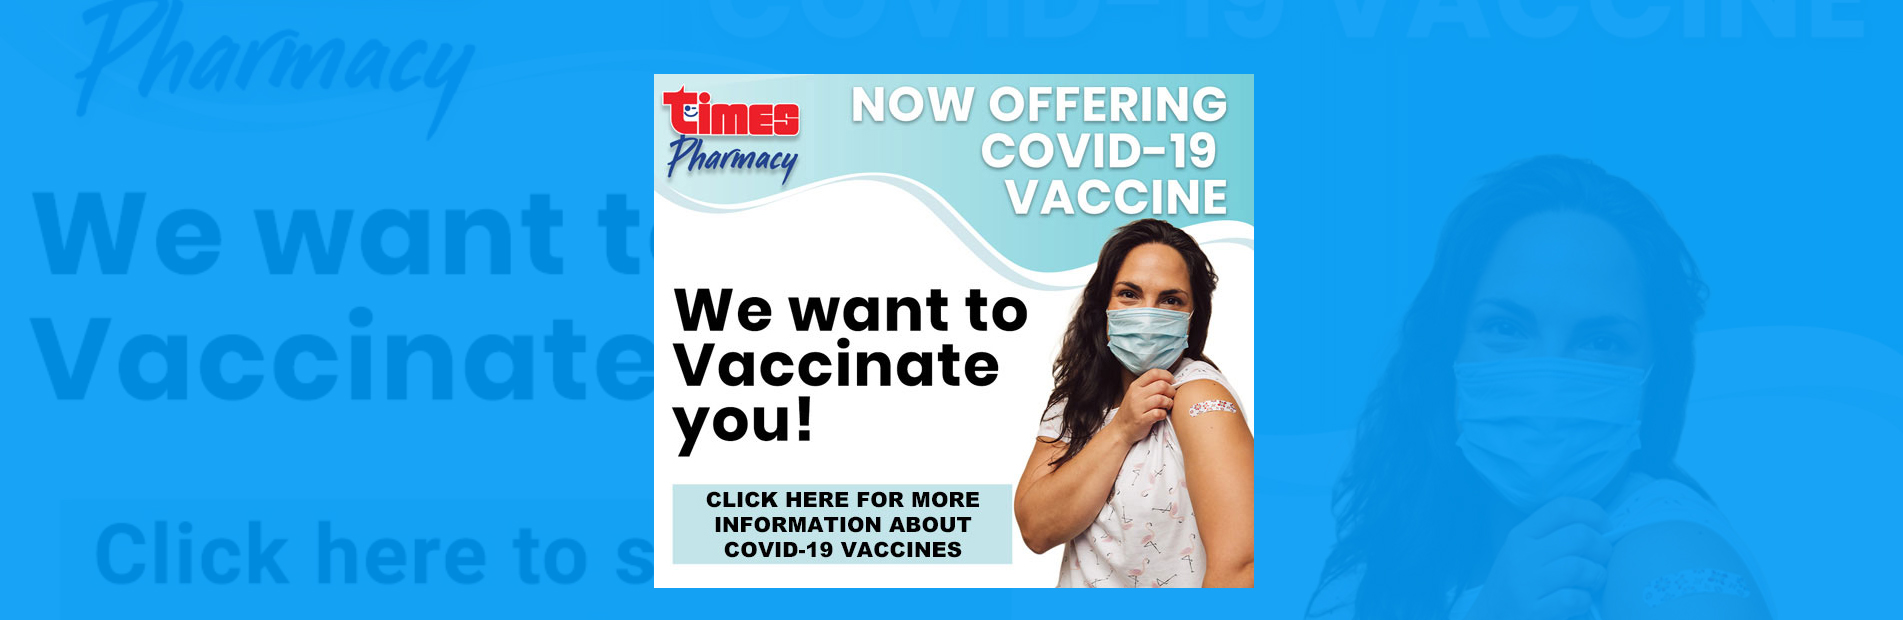 Now Offering Covid-19 Vaccine